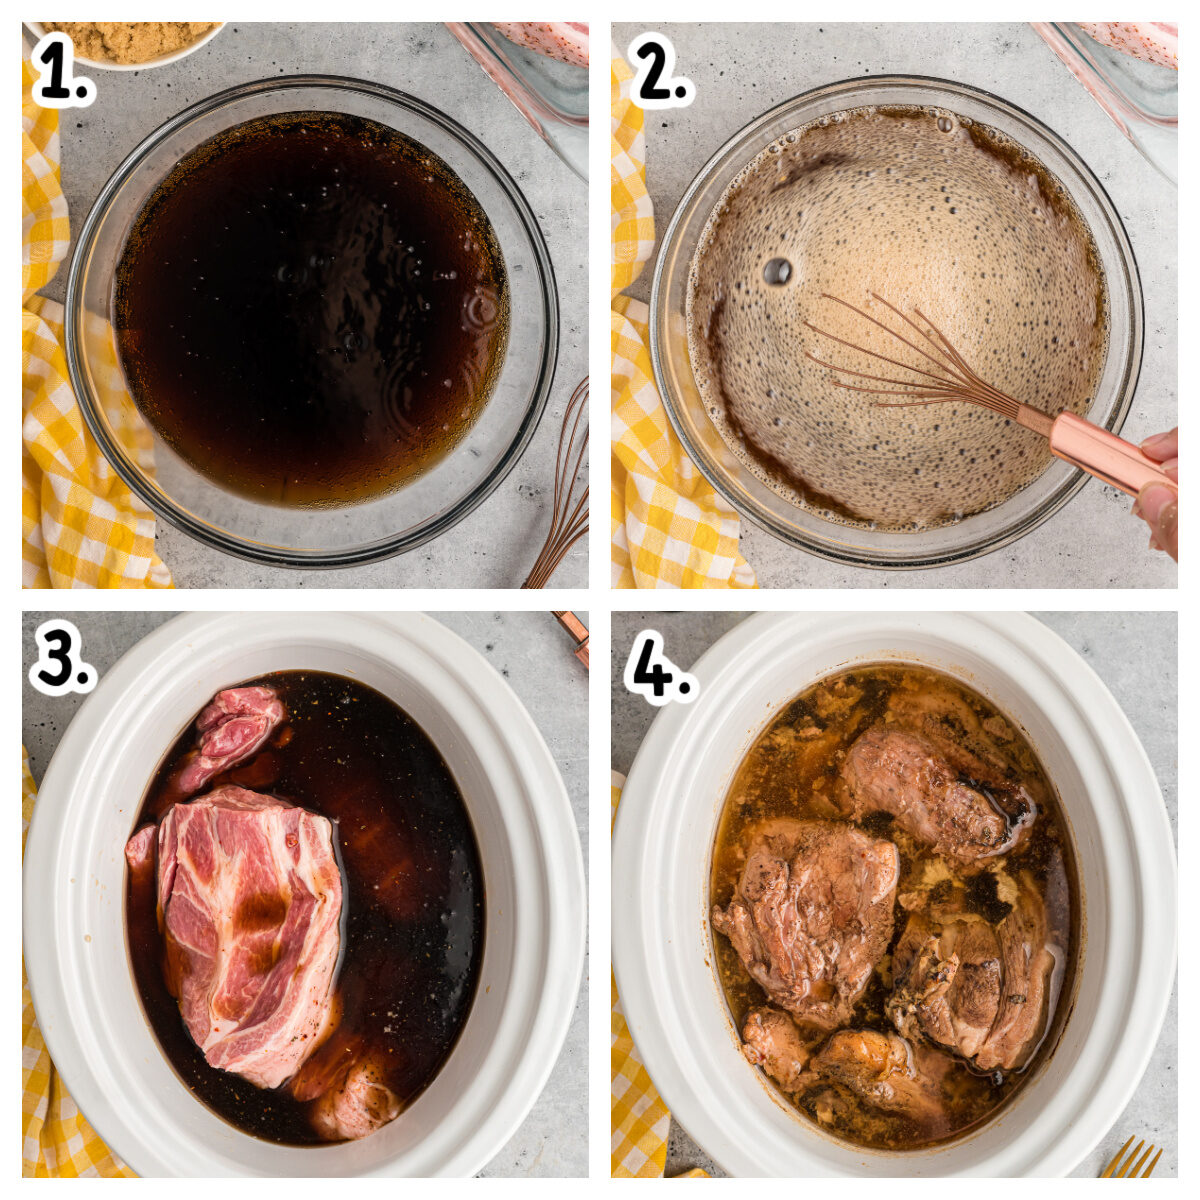 Four images showing how to make coca cola and brown sugar sauce and add to crockpot with pork.